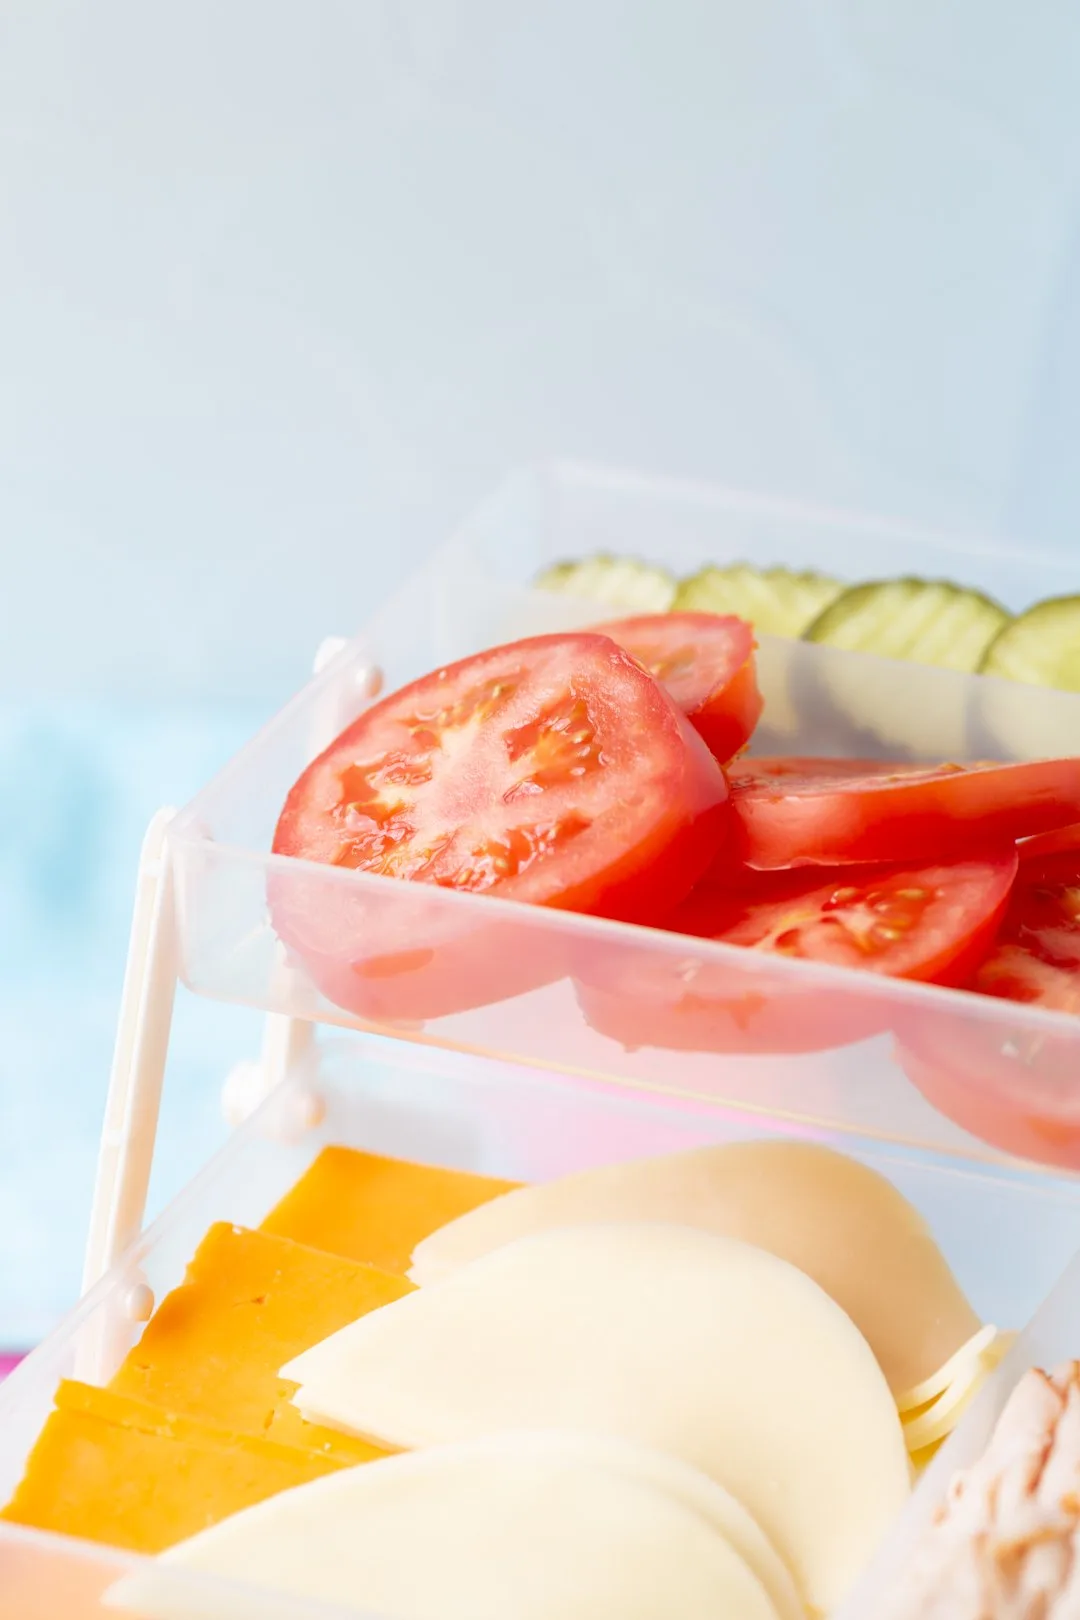 slices of tomatoes layered into a sandwich tackle box